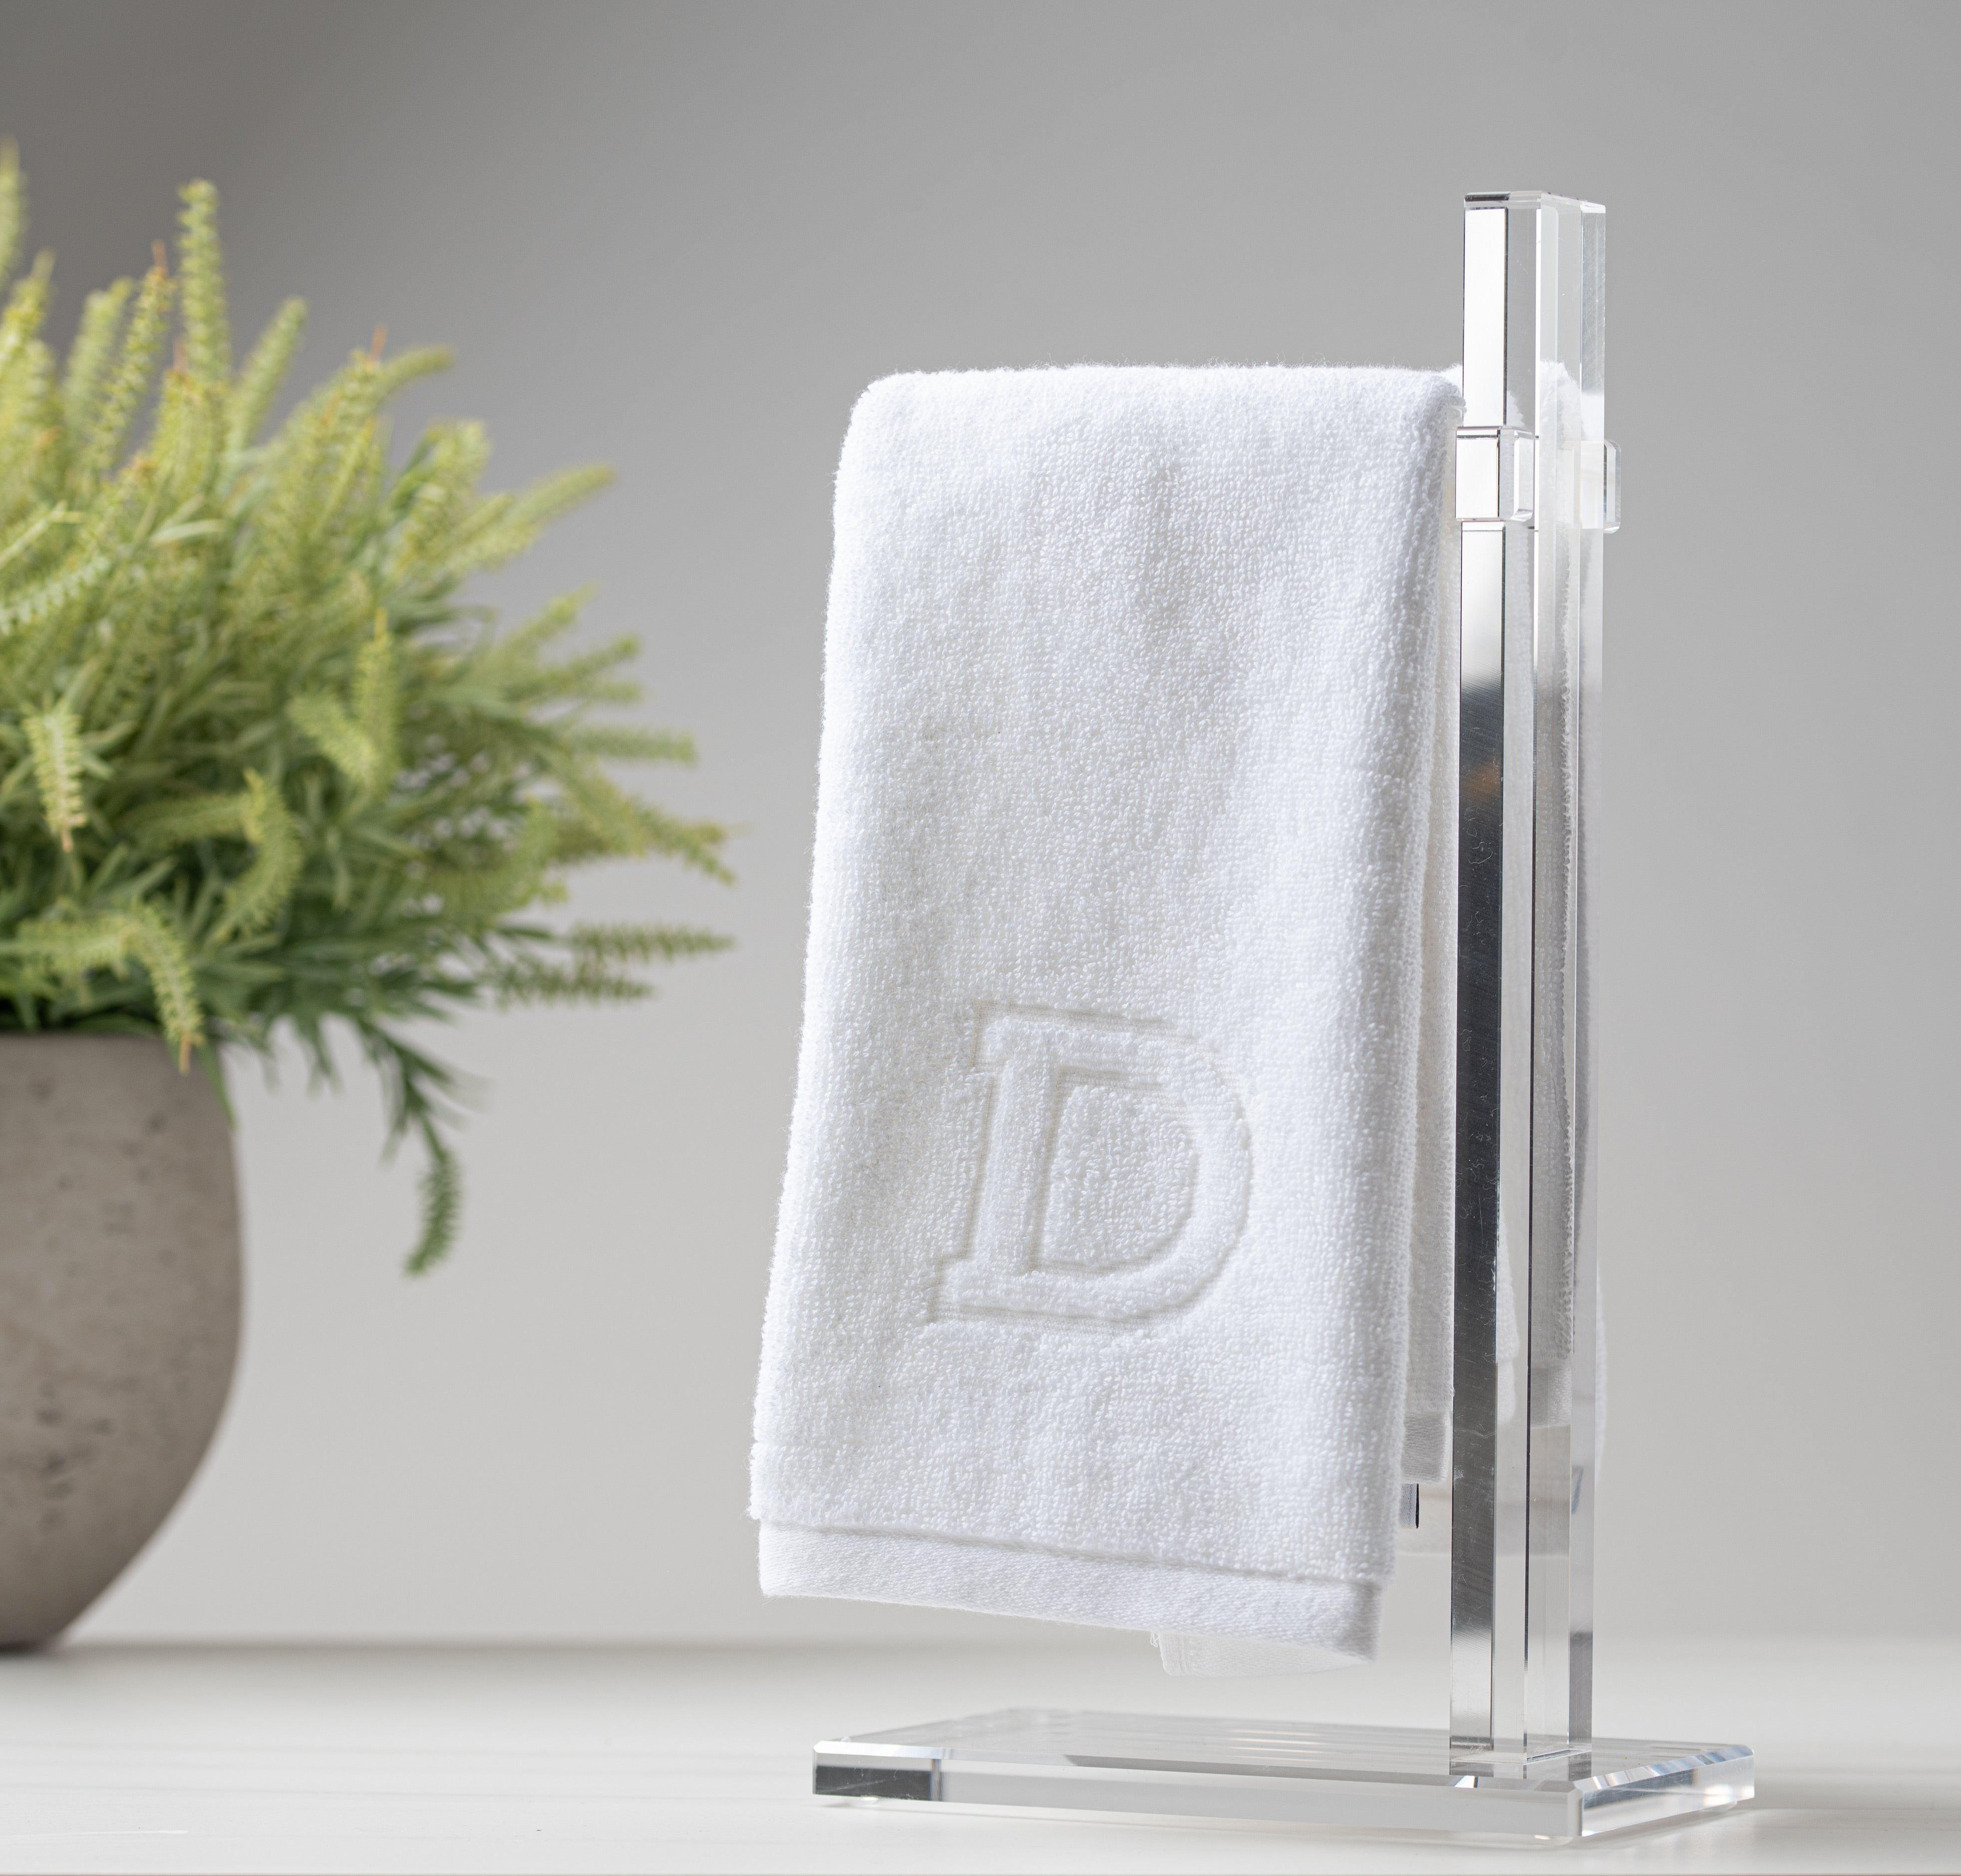 Matouk Monogrammed Towels On Acrylic Towel Stand